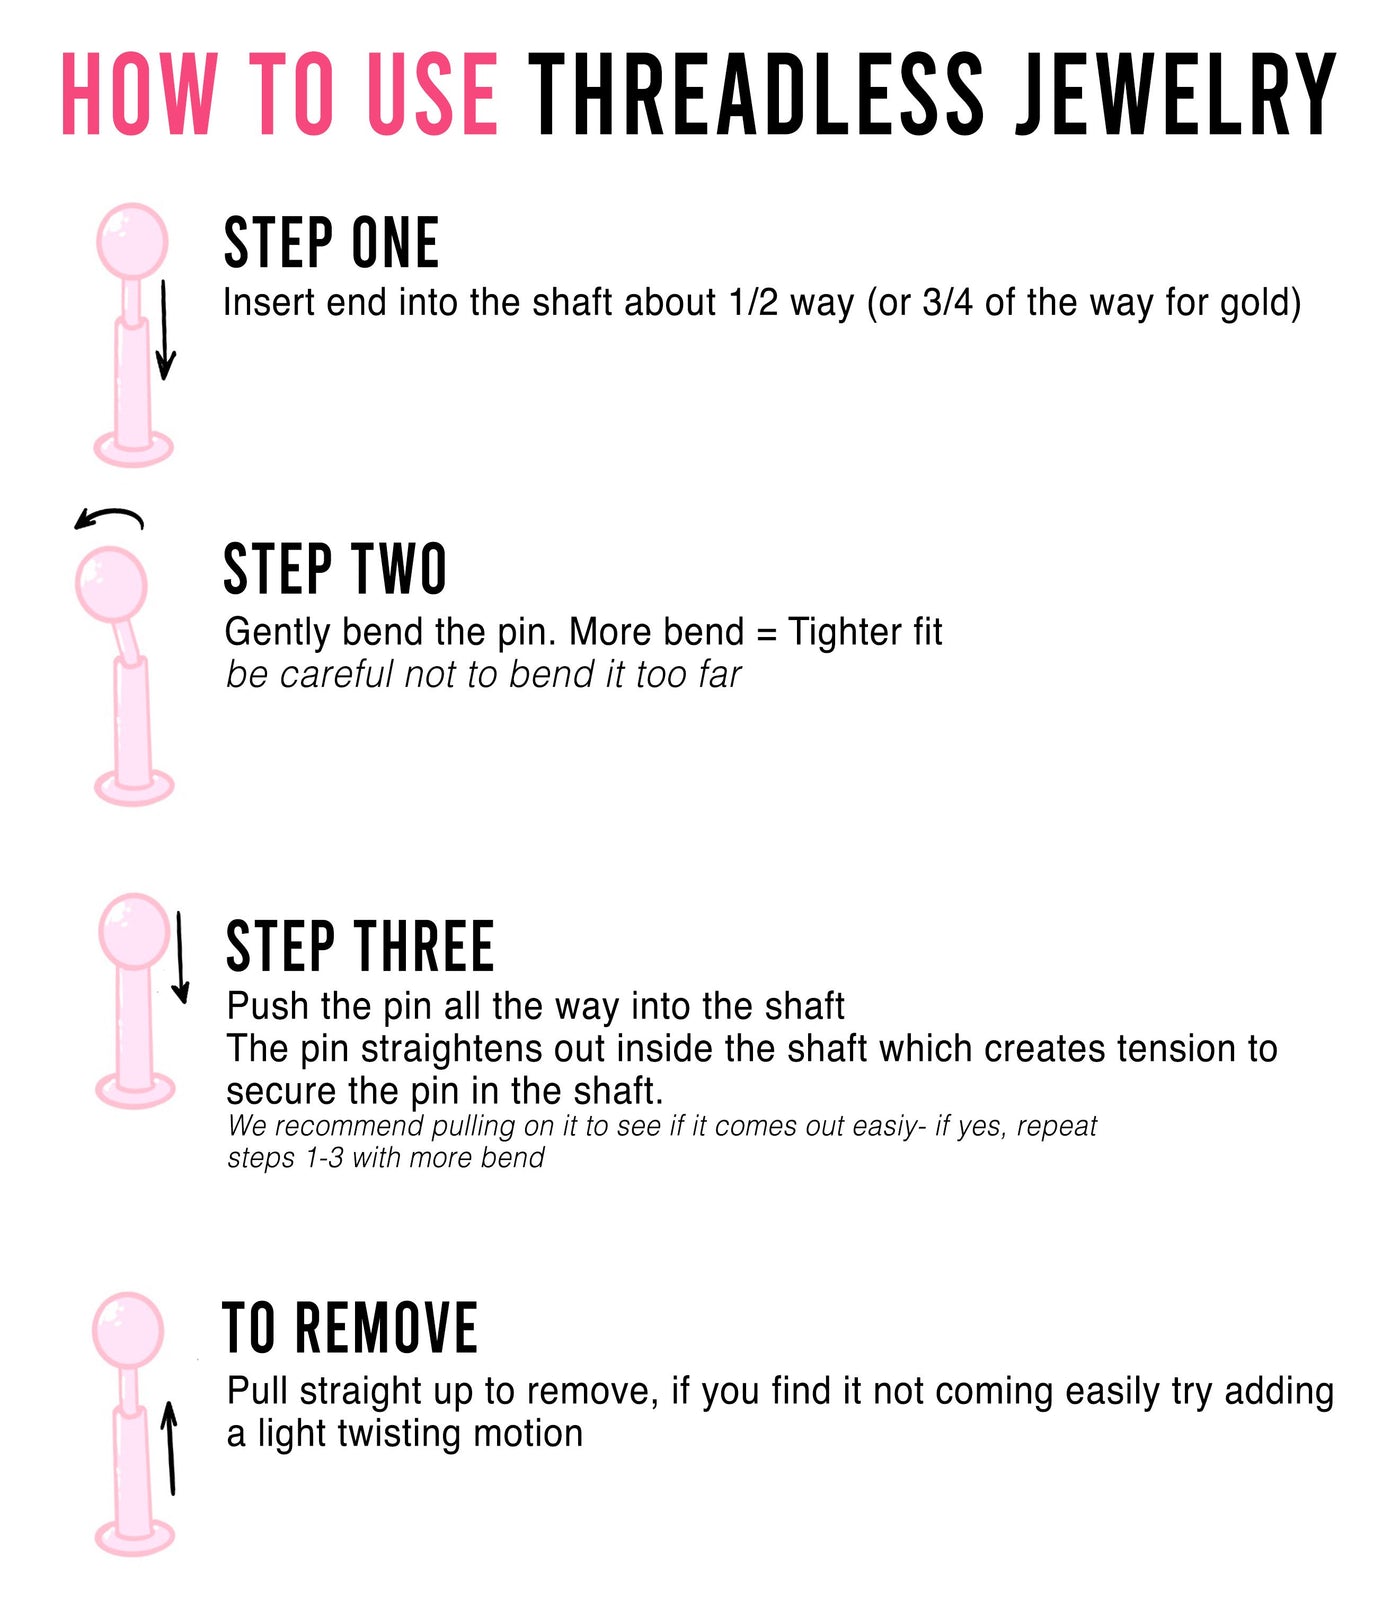 how to insert or remove threadless jewelry - insert end into shaft about 1/2 for steel or titanium or 3/4 for gold and bend slightly - push pin the rest of the way down. to remove pull straight up - if it is hard to remove then try twisting when pulling